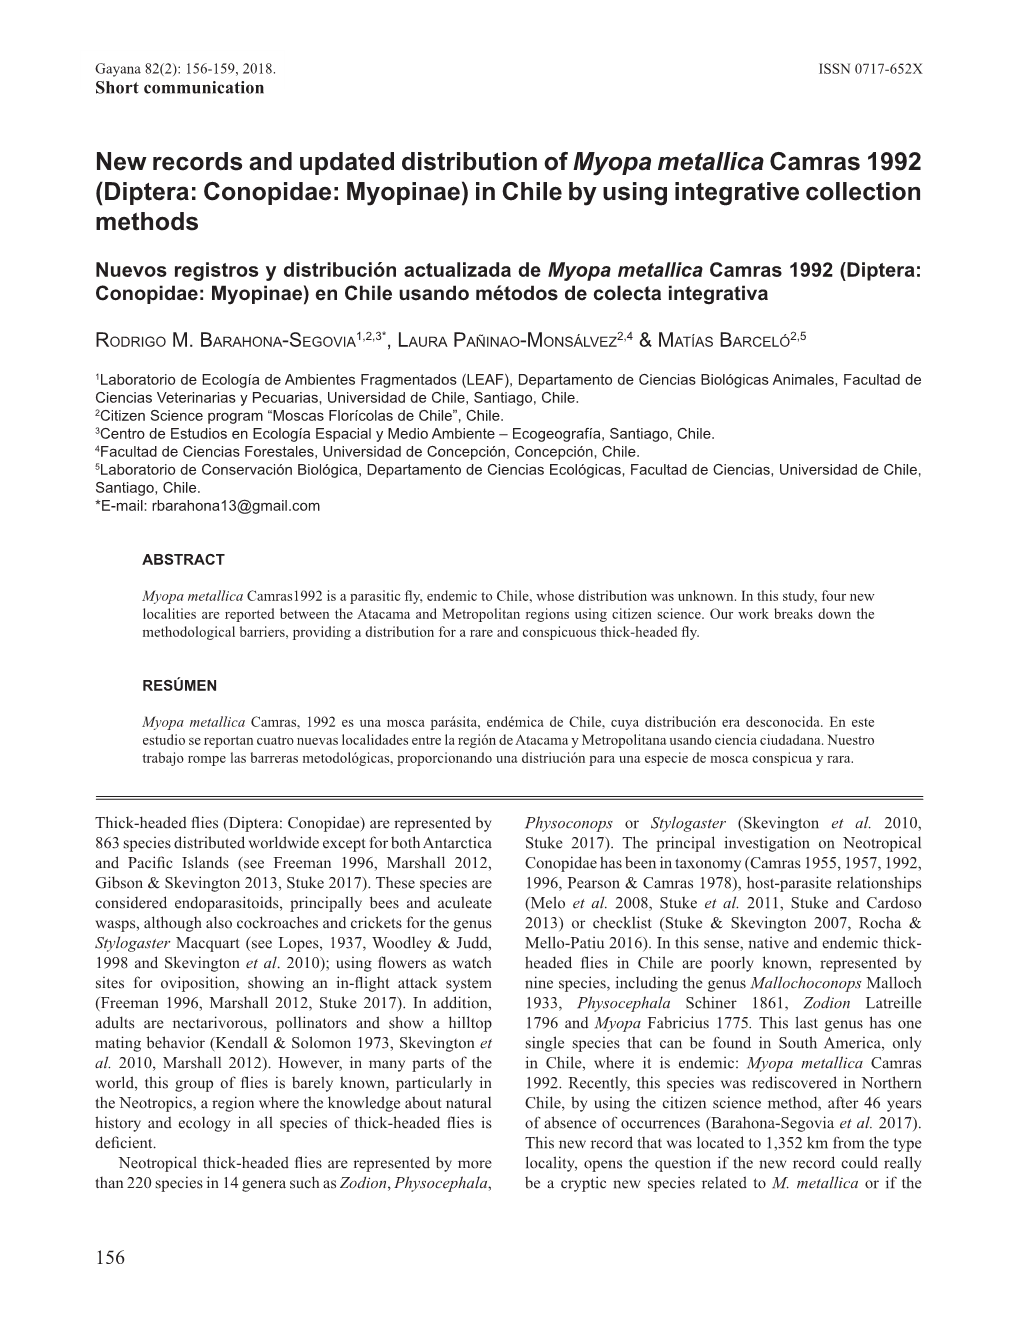 Diptera: Conopidae: Myopinae) in Chile by Using Integrative Collection Methods